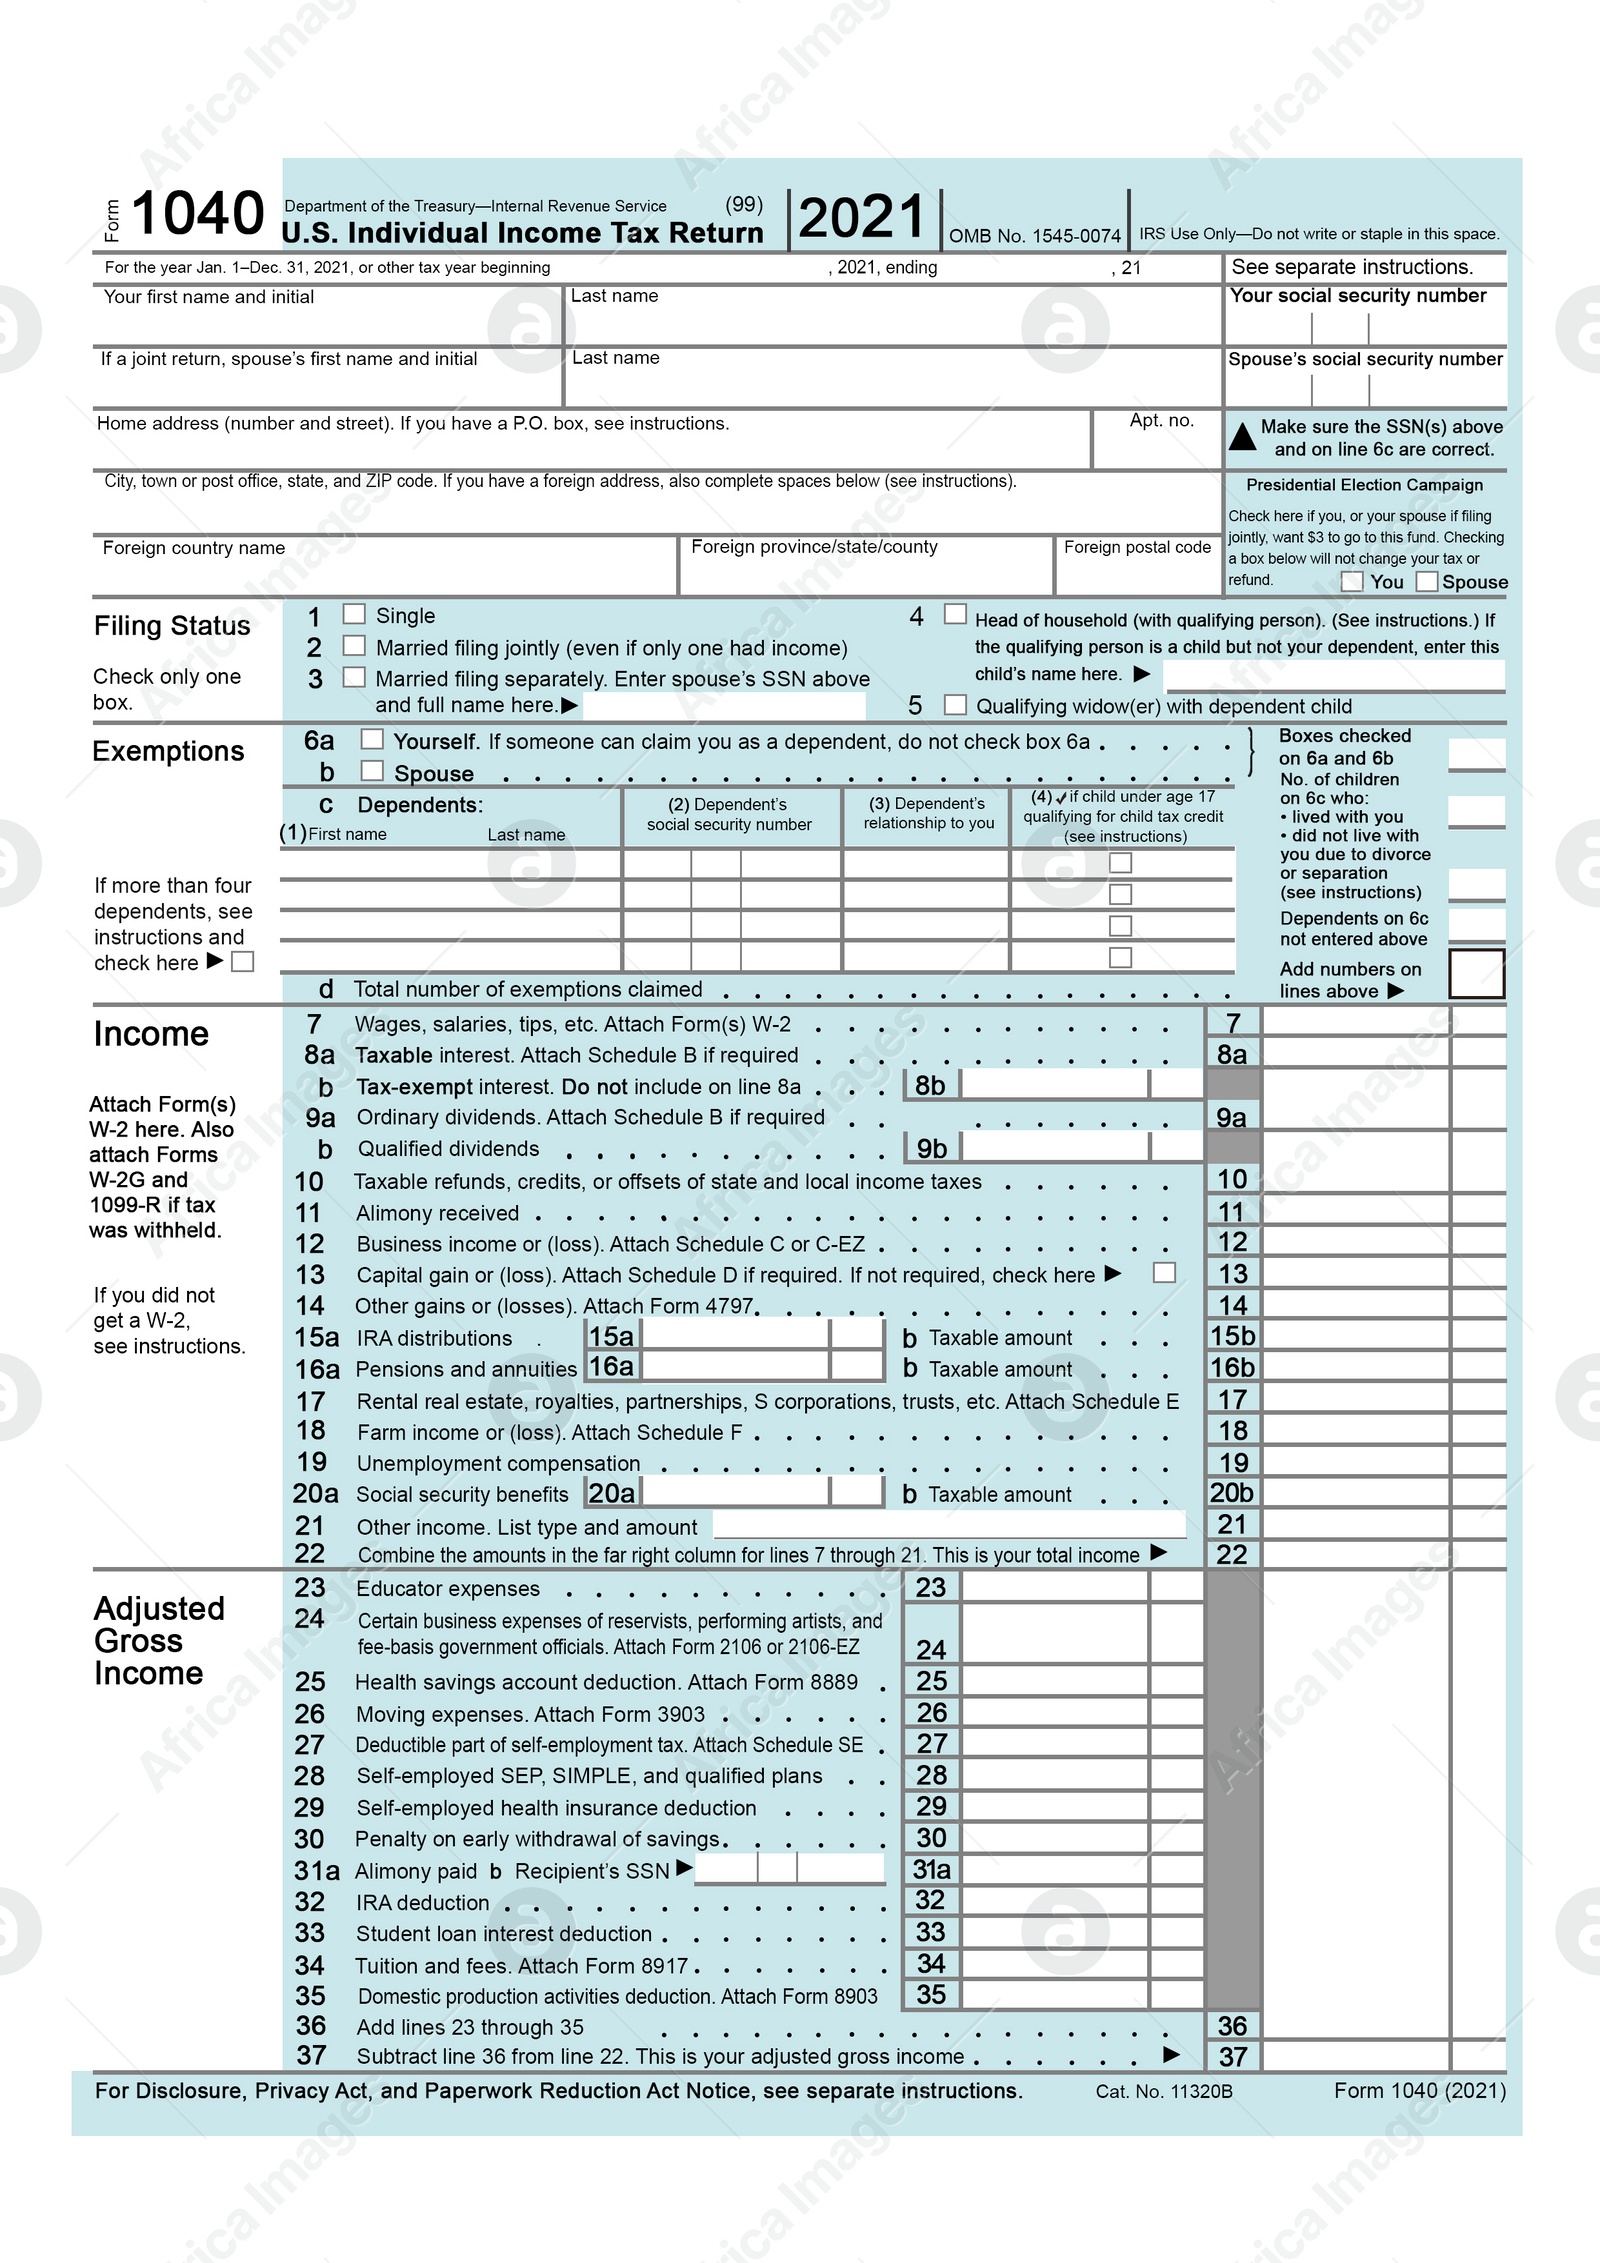 Image of Illustration of tax form. Business and finance concept 